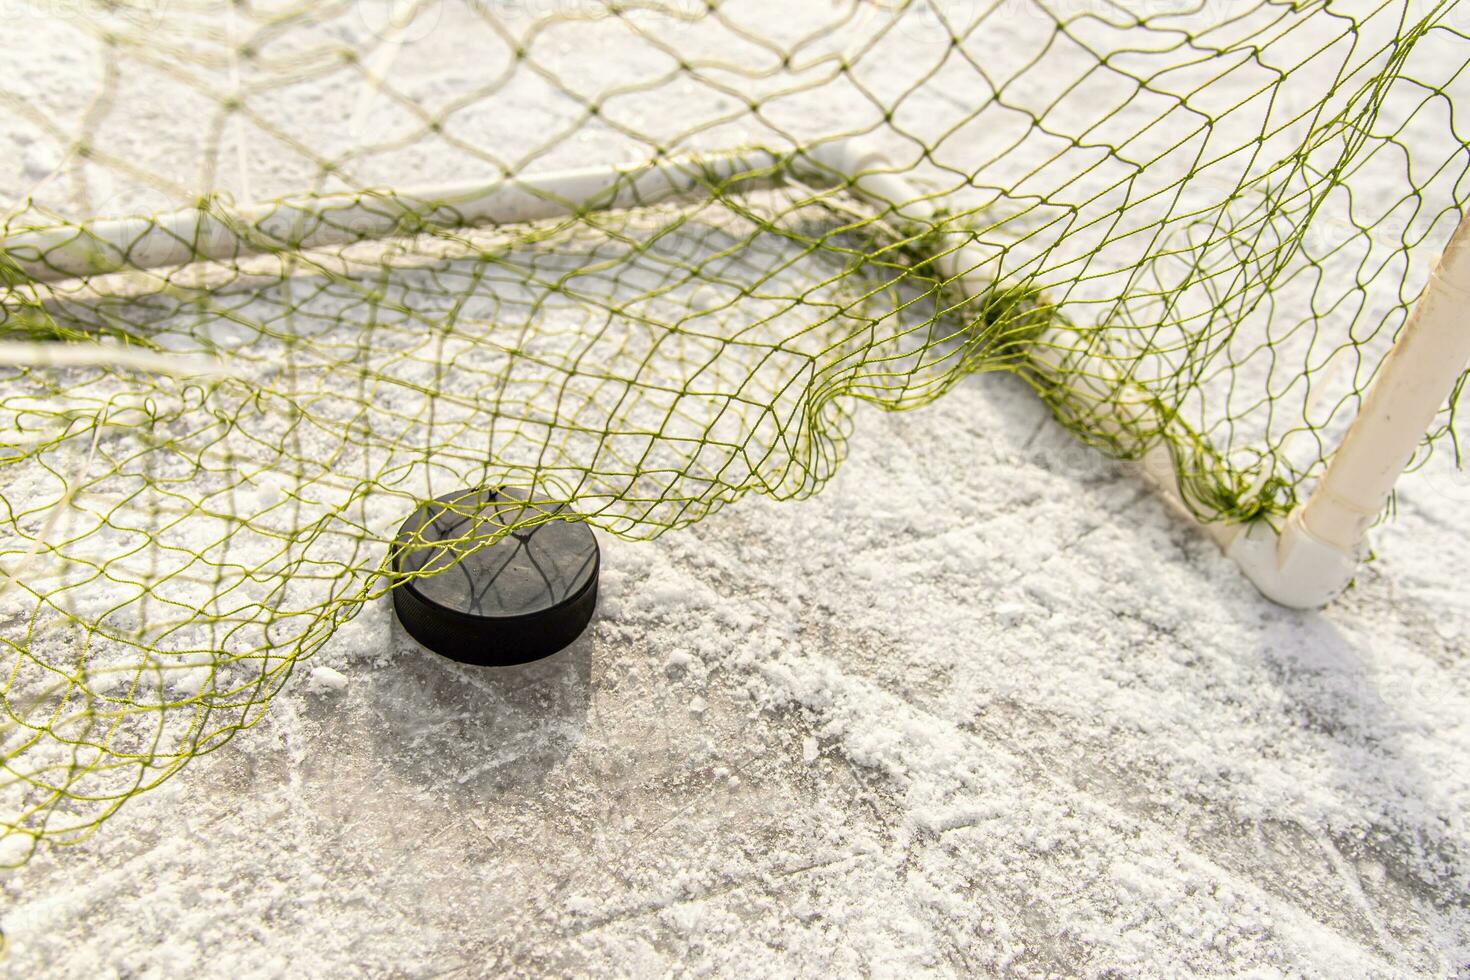 hockey puck in the goal net close-up photo